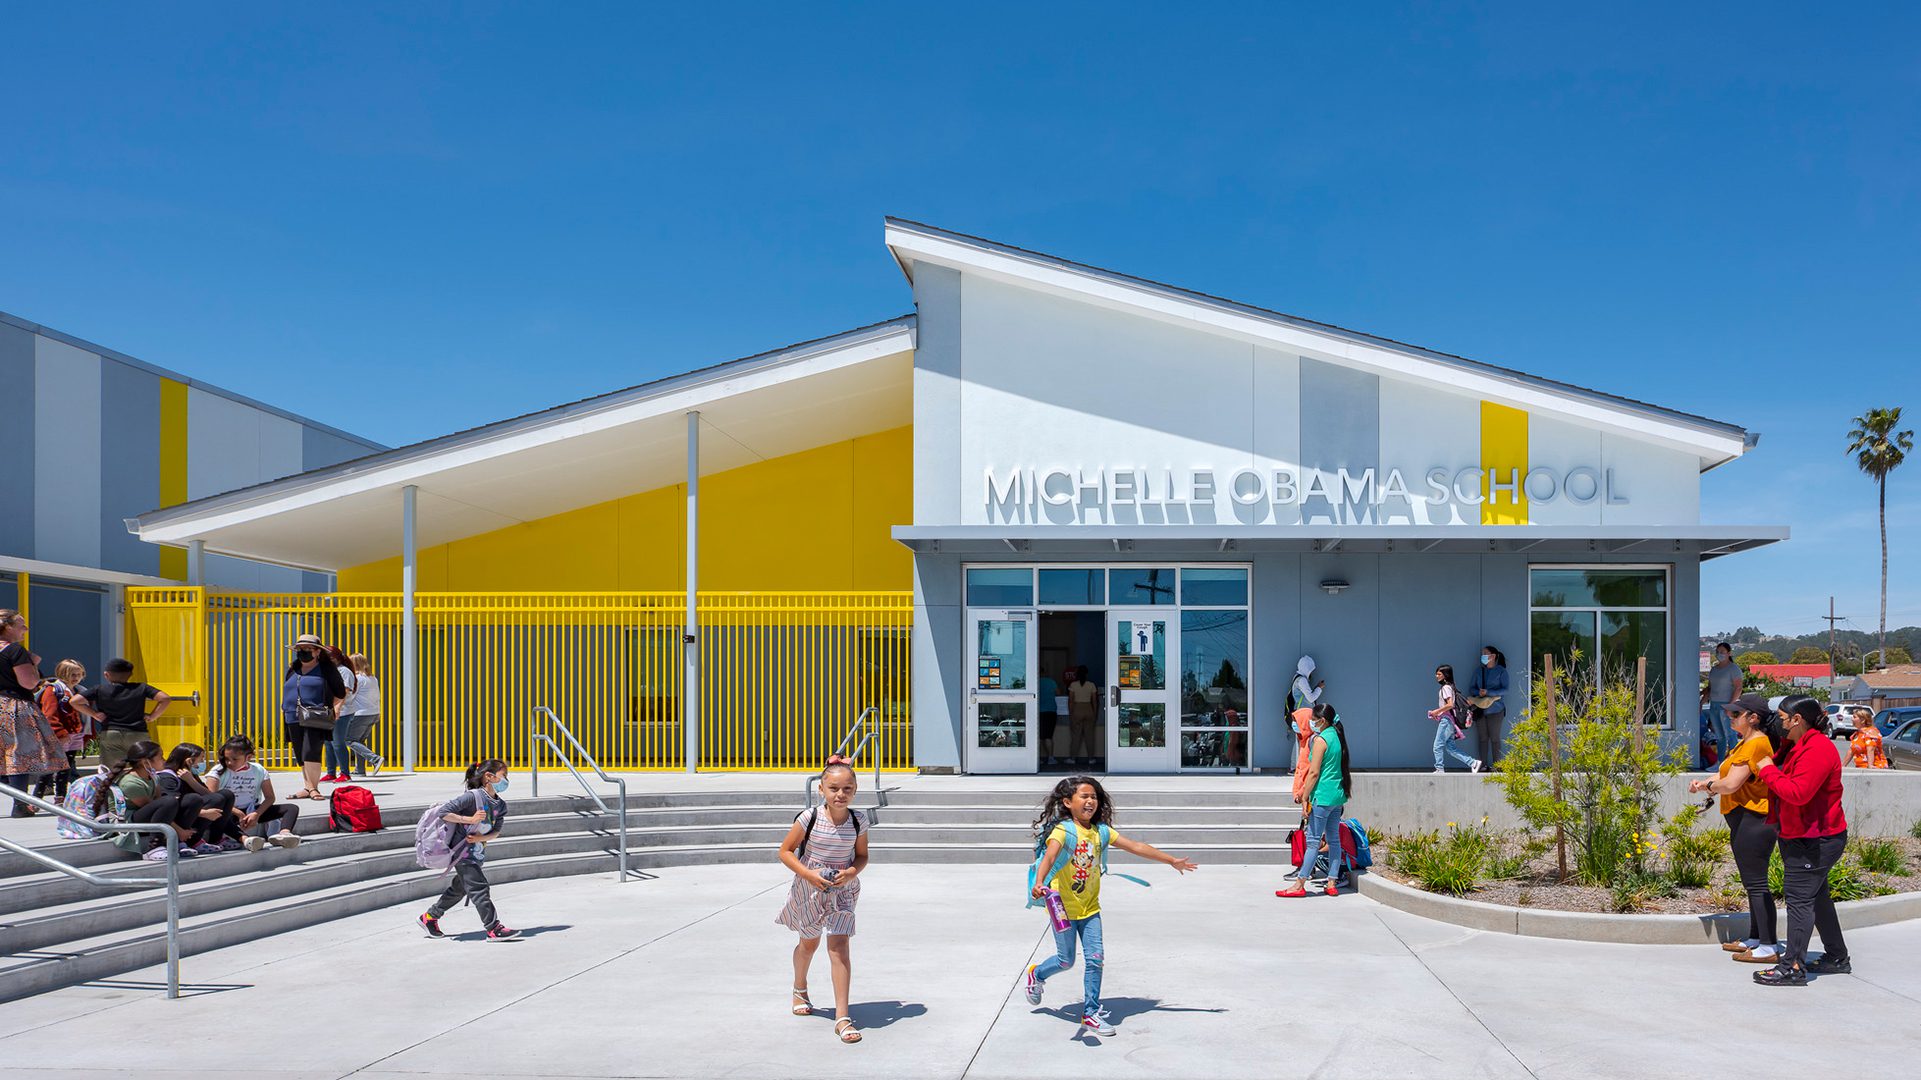 Image of exterior entry of Michelle Obama School with elementary students and parents/guardians